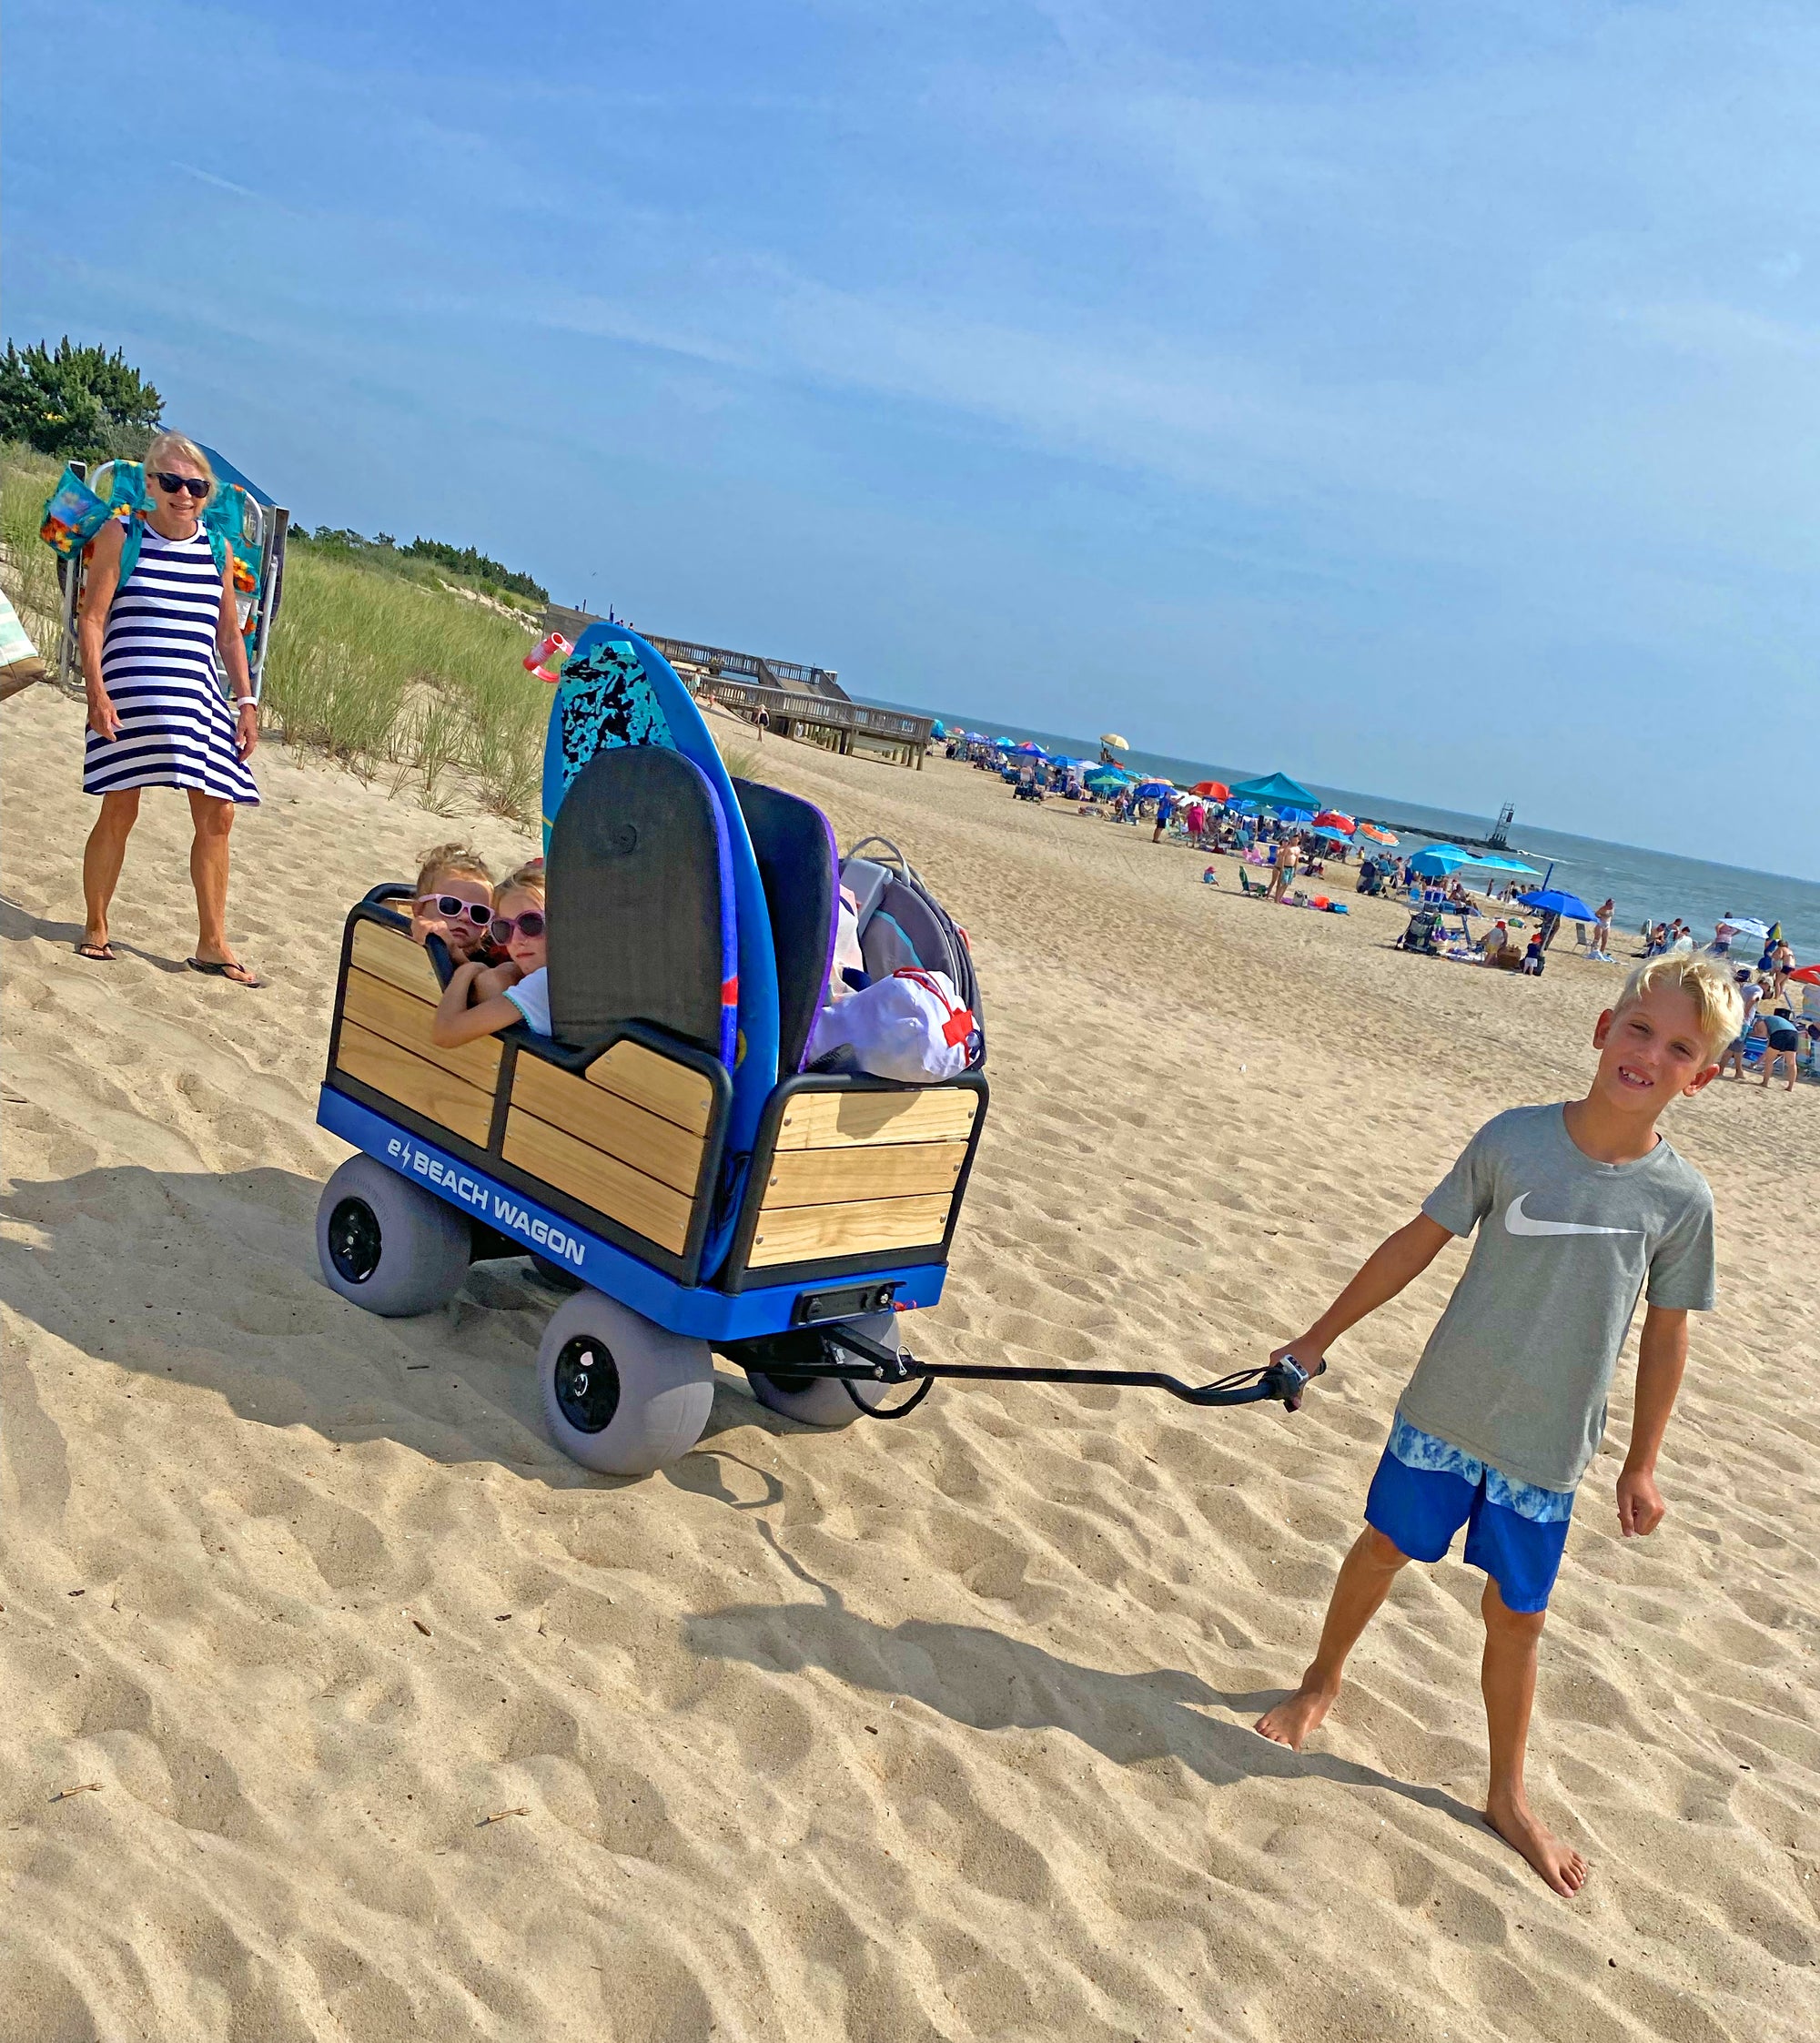 e-Beach Wagon, great for grandparents and kids!